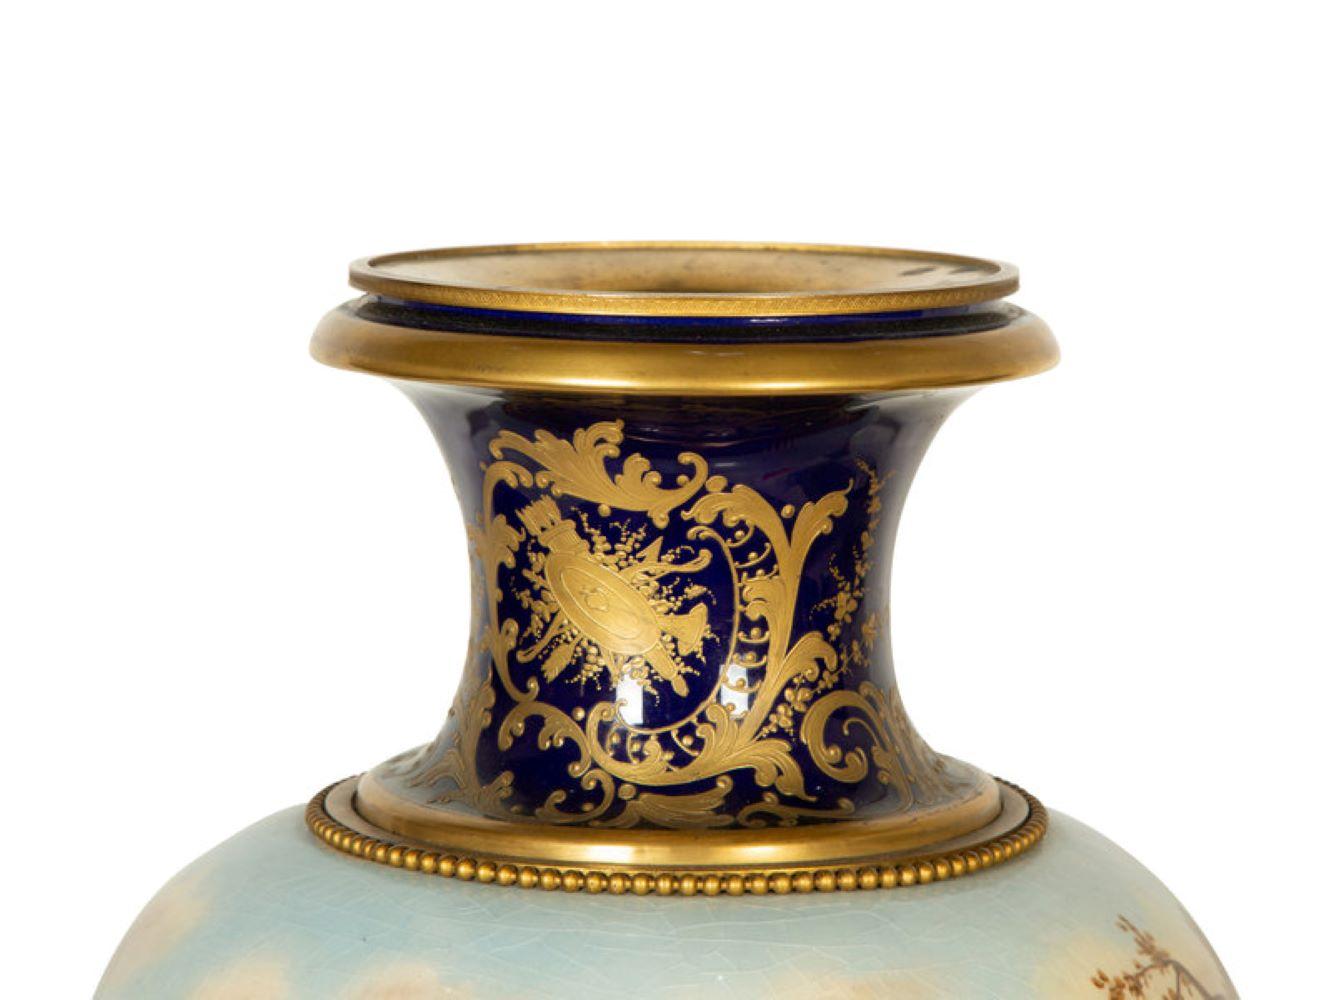 A large Sèvres style porcelain urn raised on a bronze plinth. France, circa 1880.
Measures: Height 25